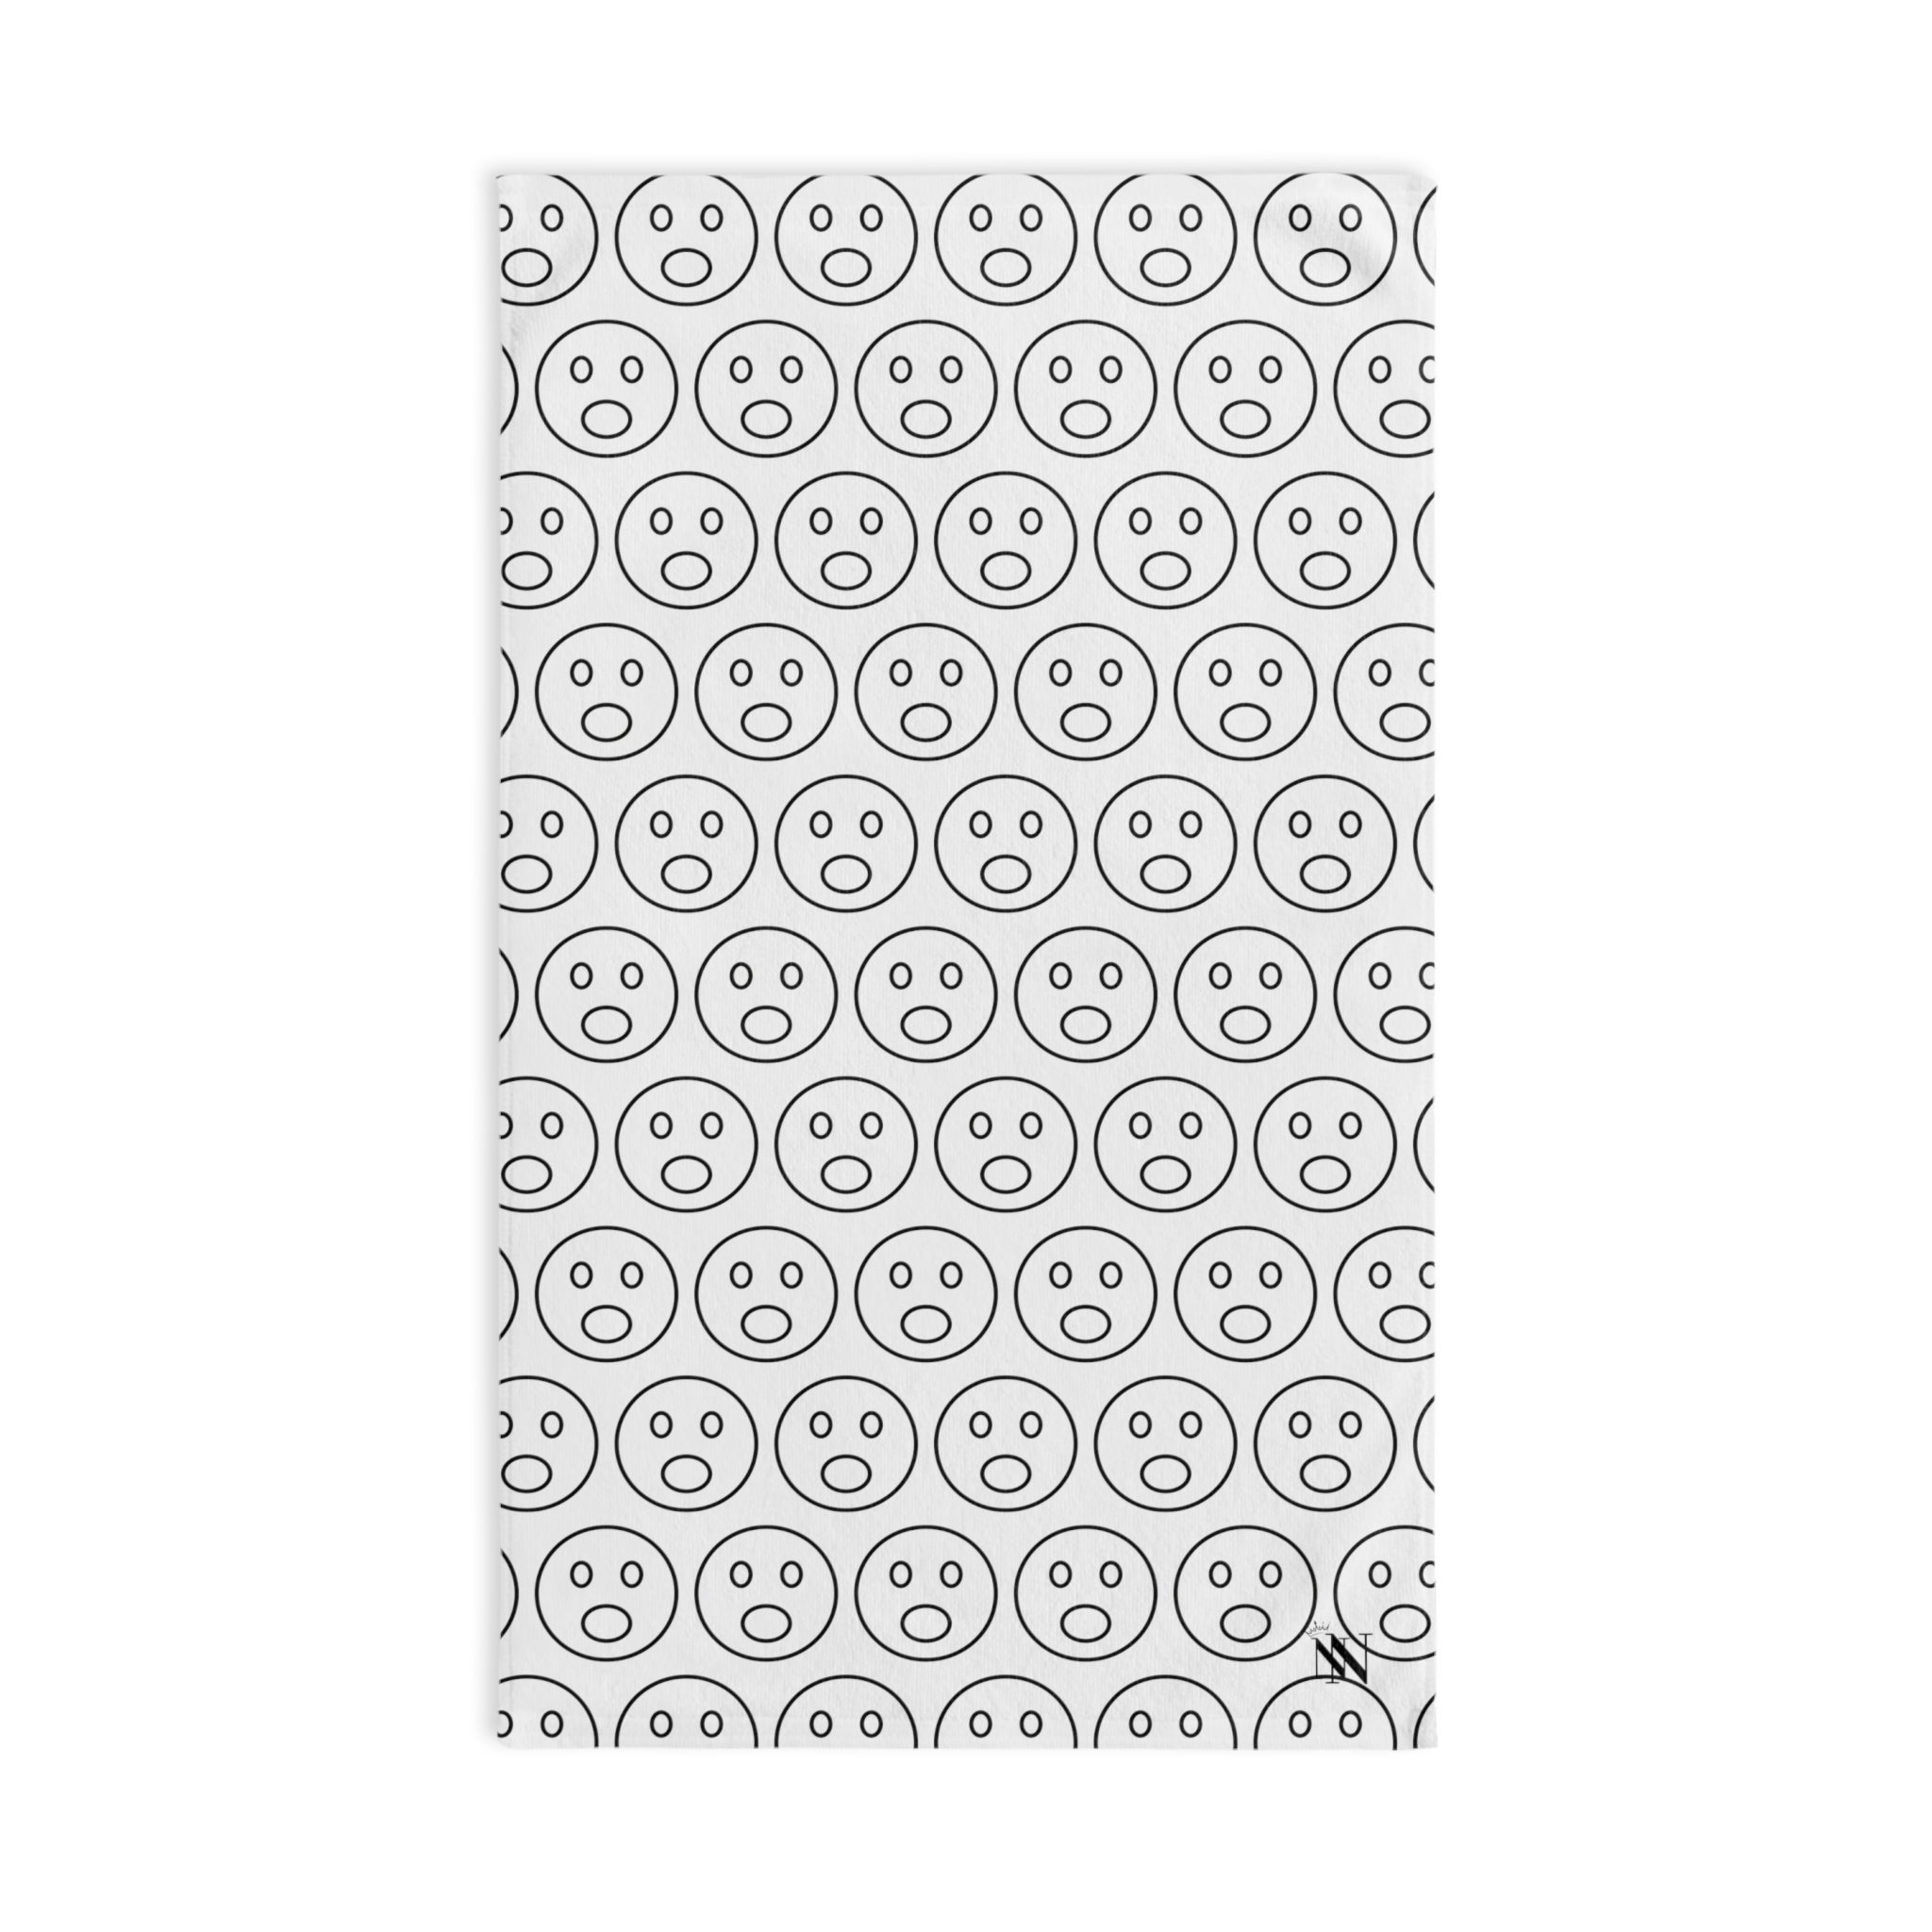 OH  Emoji Pattern White | Funny Gifts for Men - Gifts for Him - Birthday Gifts for Men, Him, Her, Husband, Boyfriend, Girlfriend, New Couple Gifts, Fathers & Valentines Day Gifts, Christmas Gifts NECTAR NAPKINS